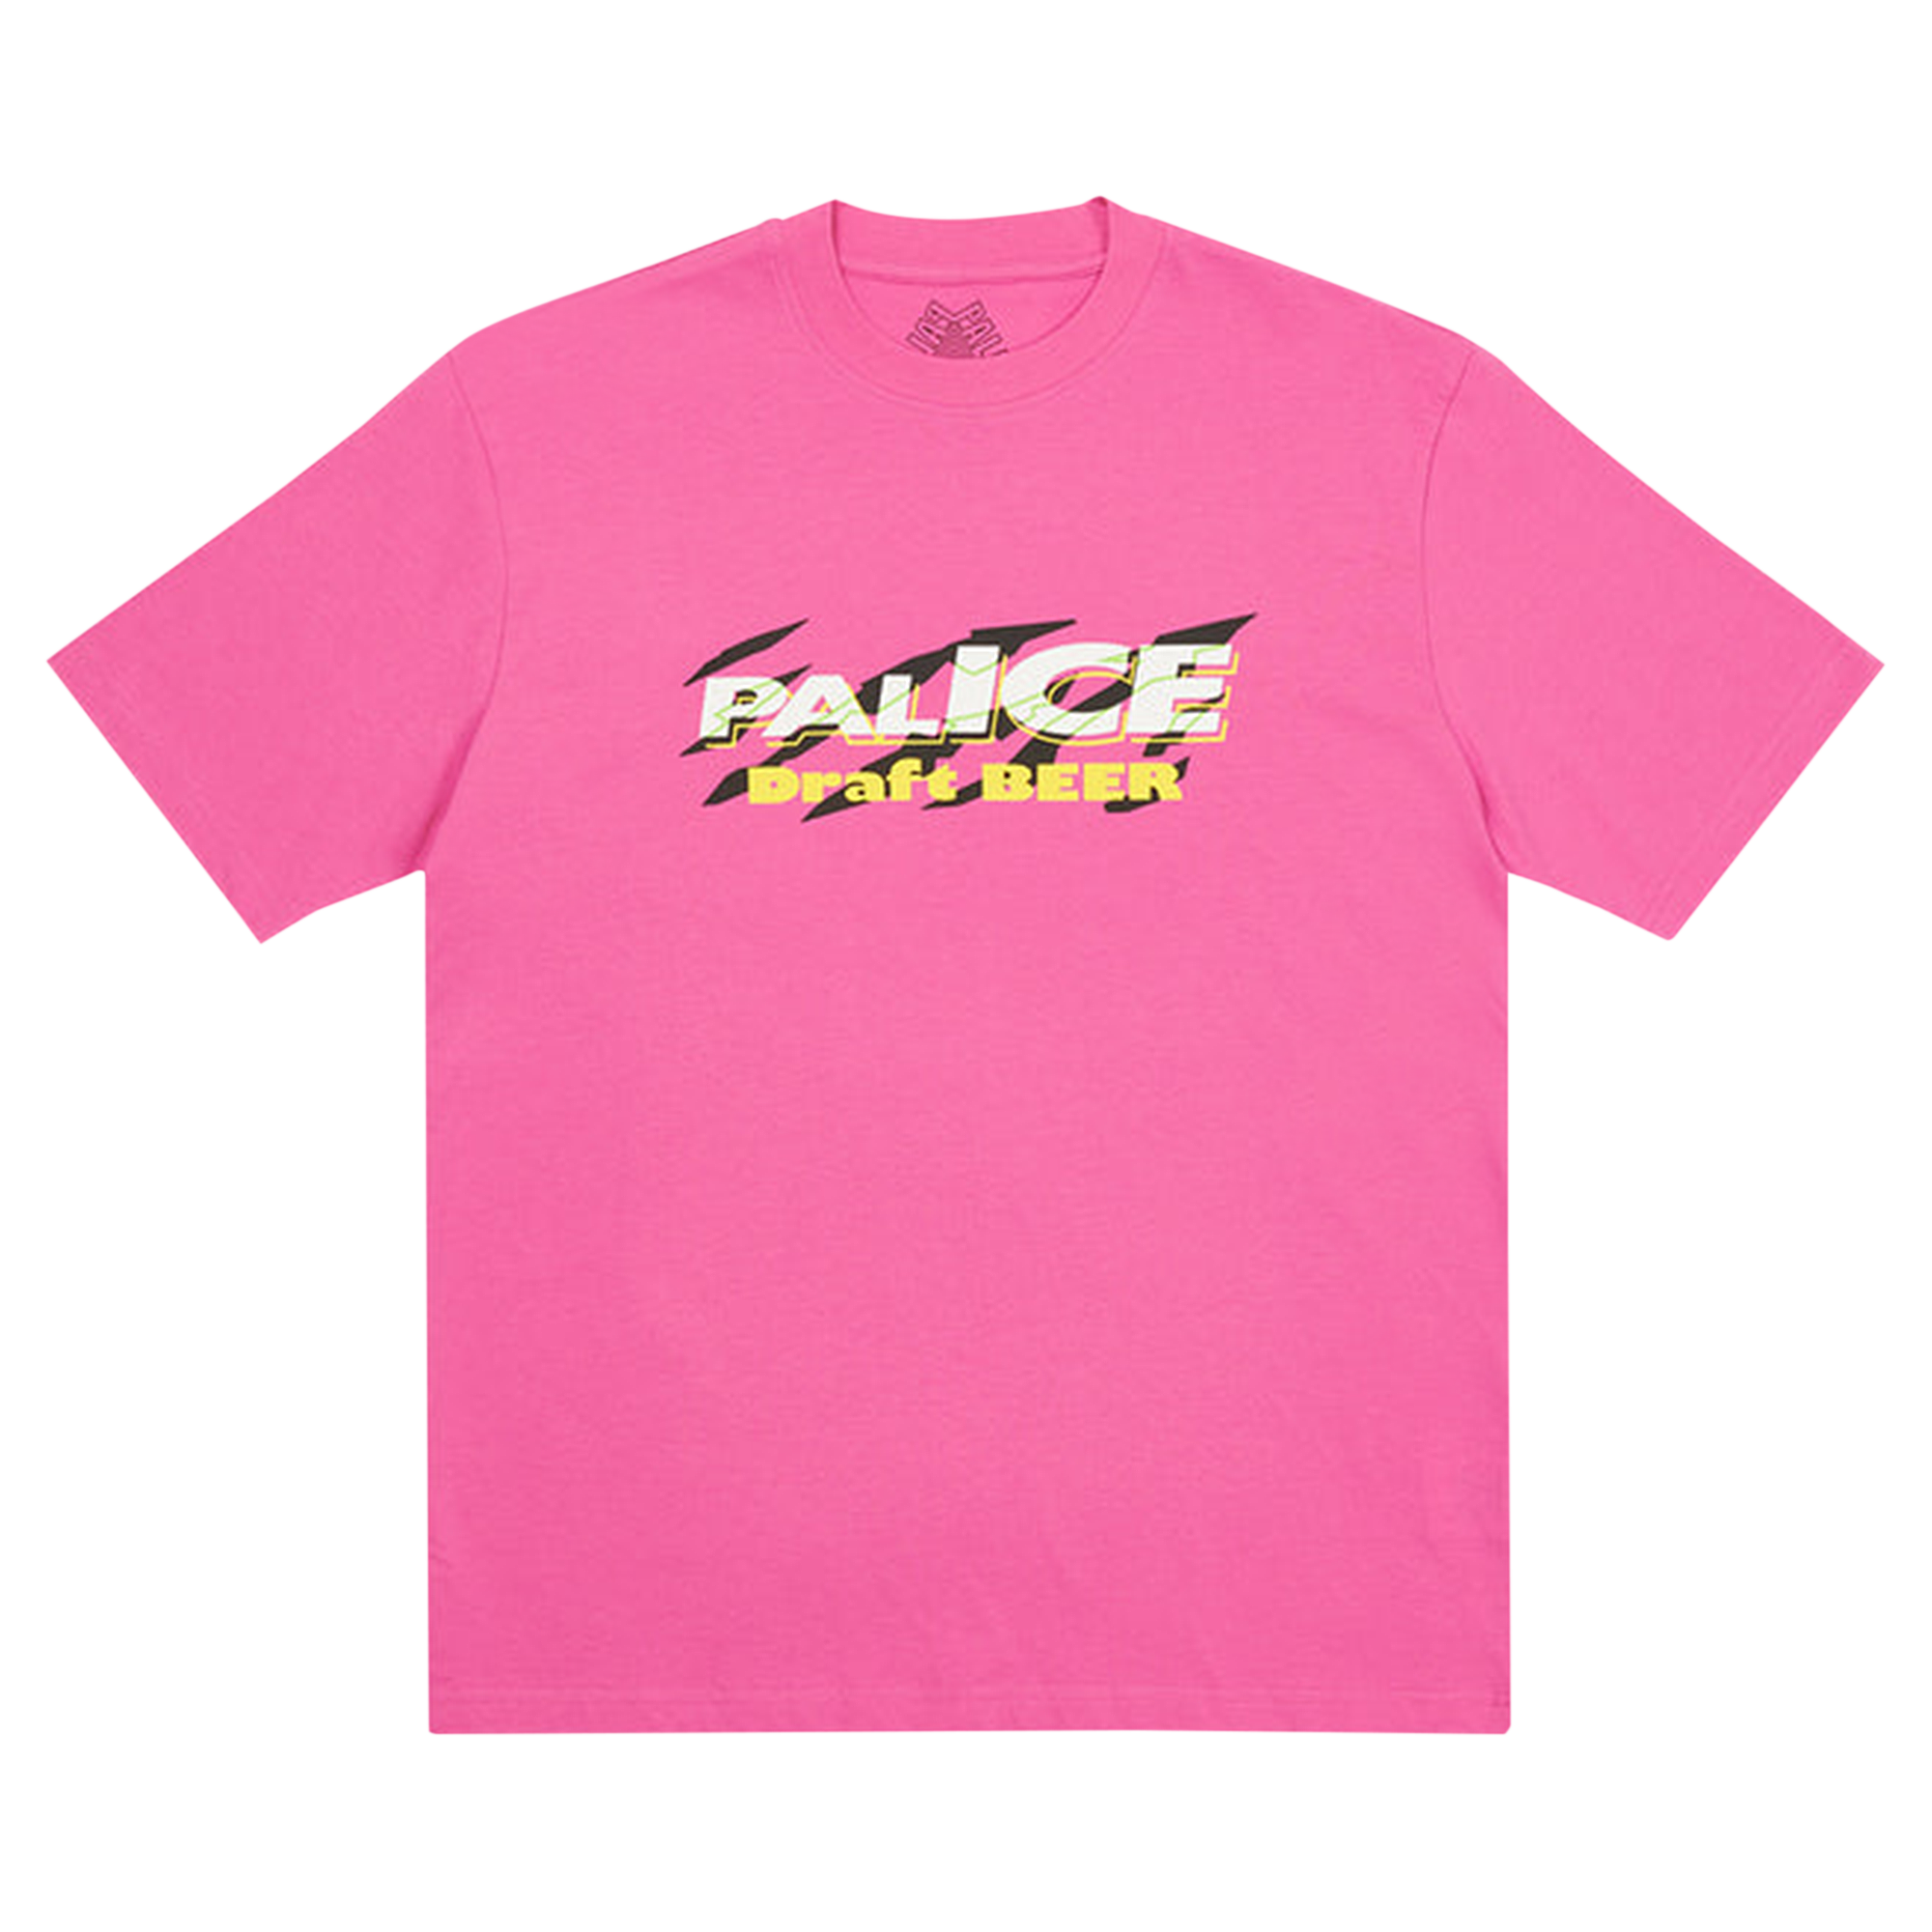 Pre-owned Palace Light Beer T-shirt 'pink'